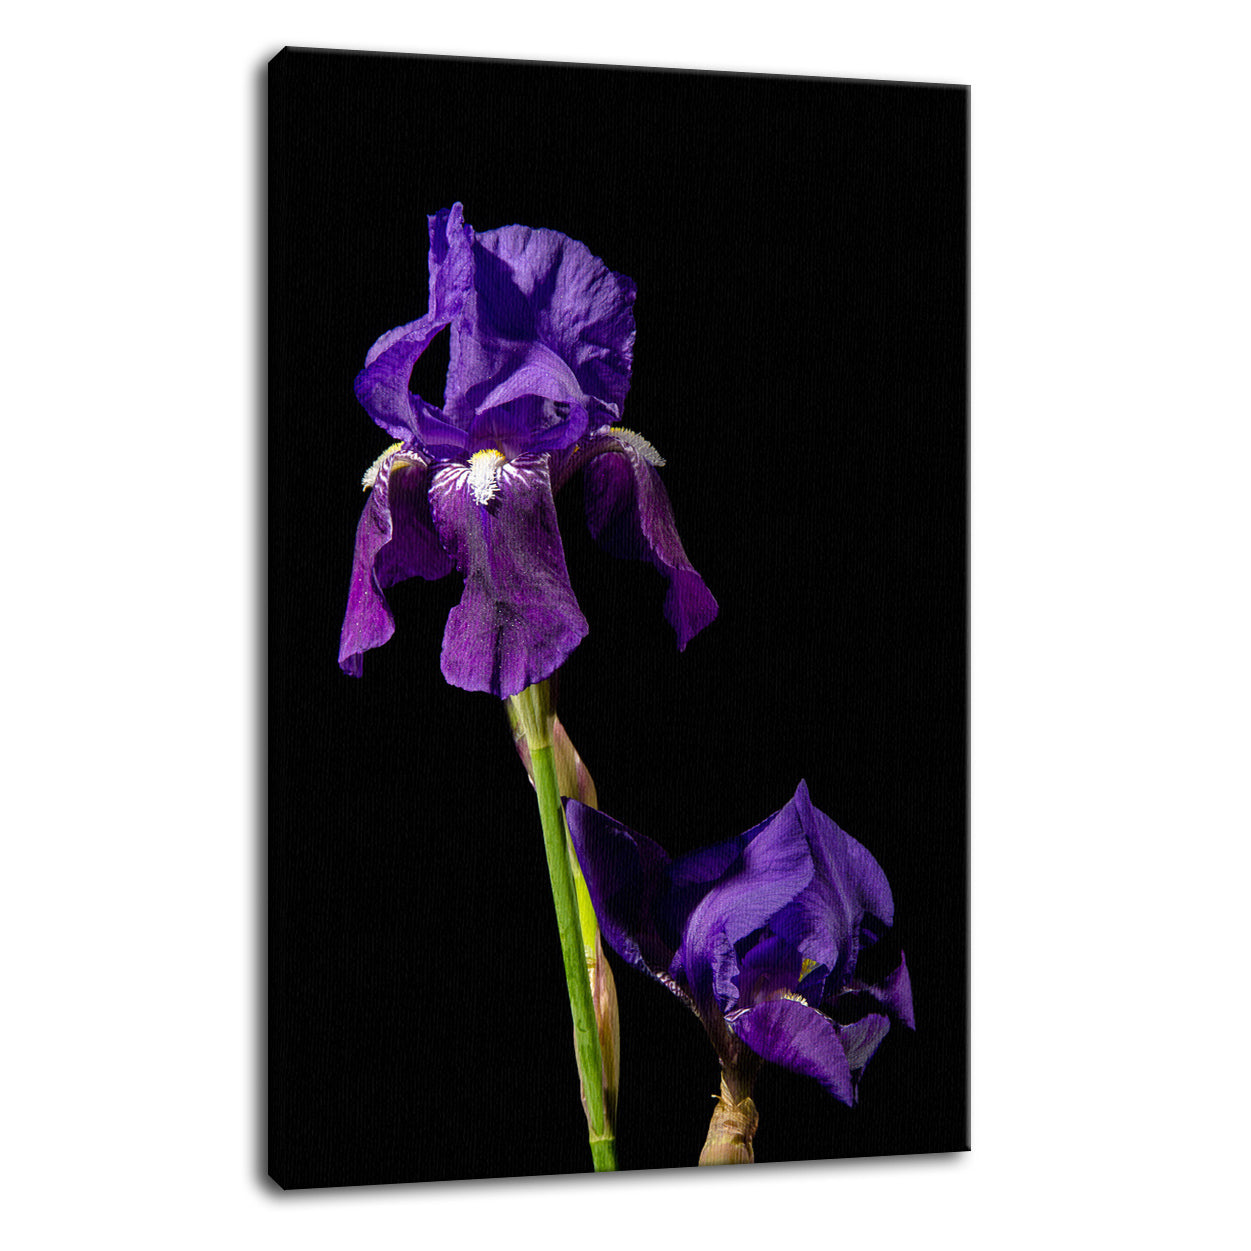 Iris on Black Nature / Floral Photo Fine Art Canvas Wall Art Prints  - PIPAFINEART